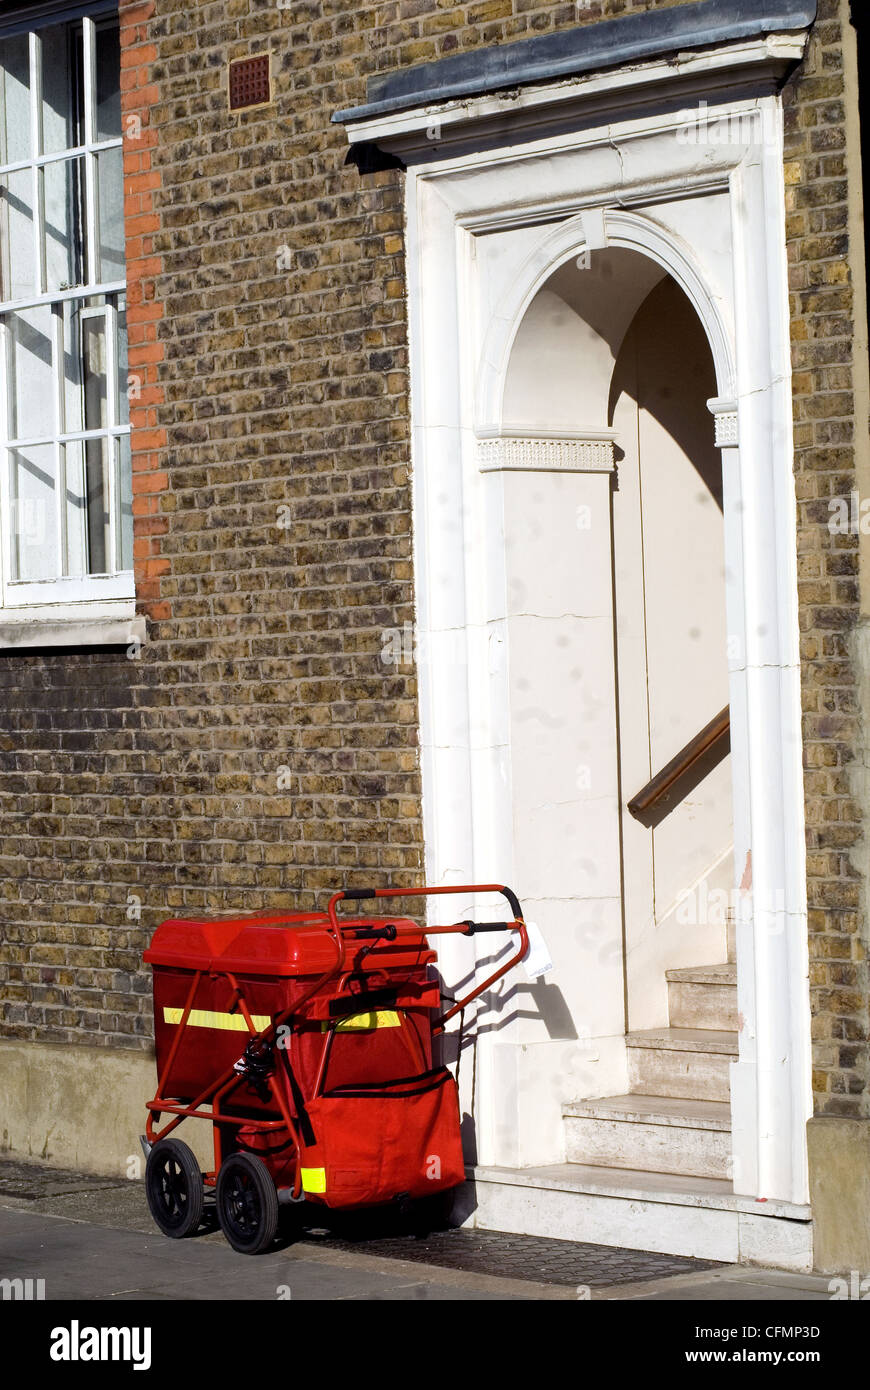 Royal Mail delivery trolley in London Stock Photo